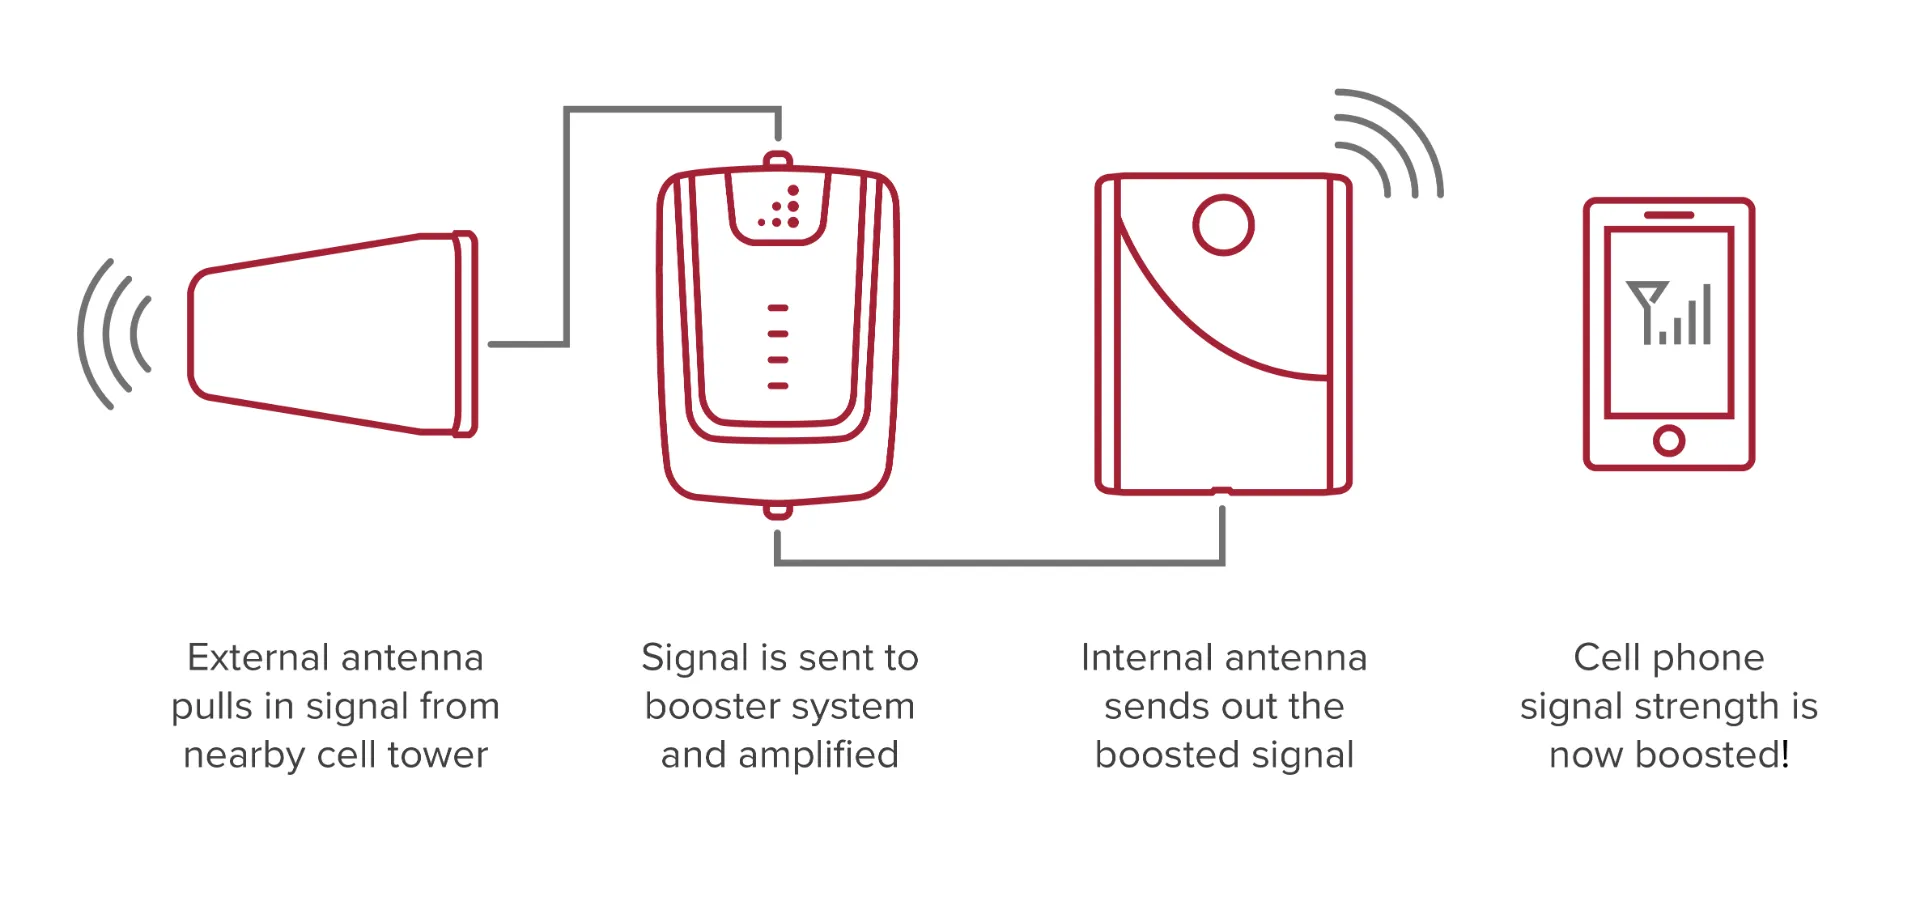 Cell phone signal booster amplifiers